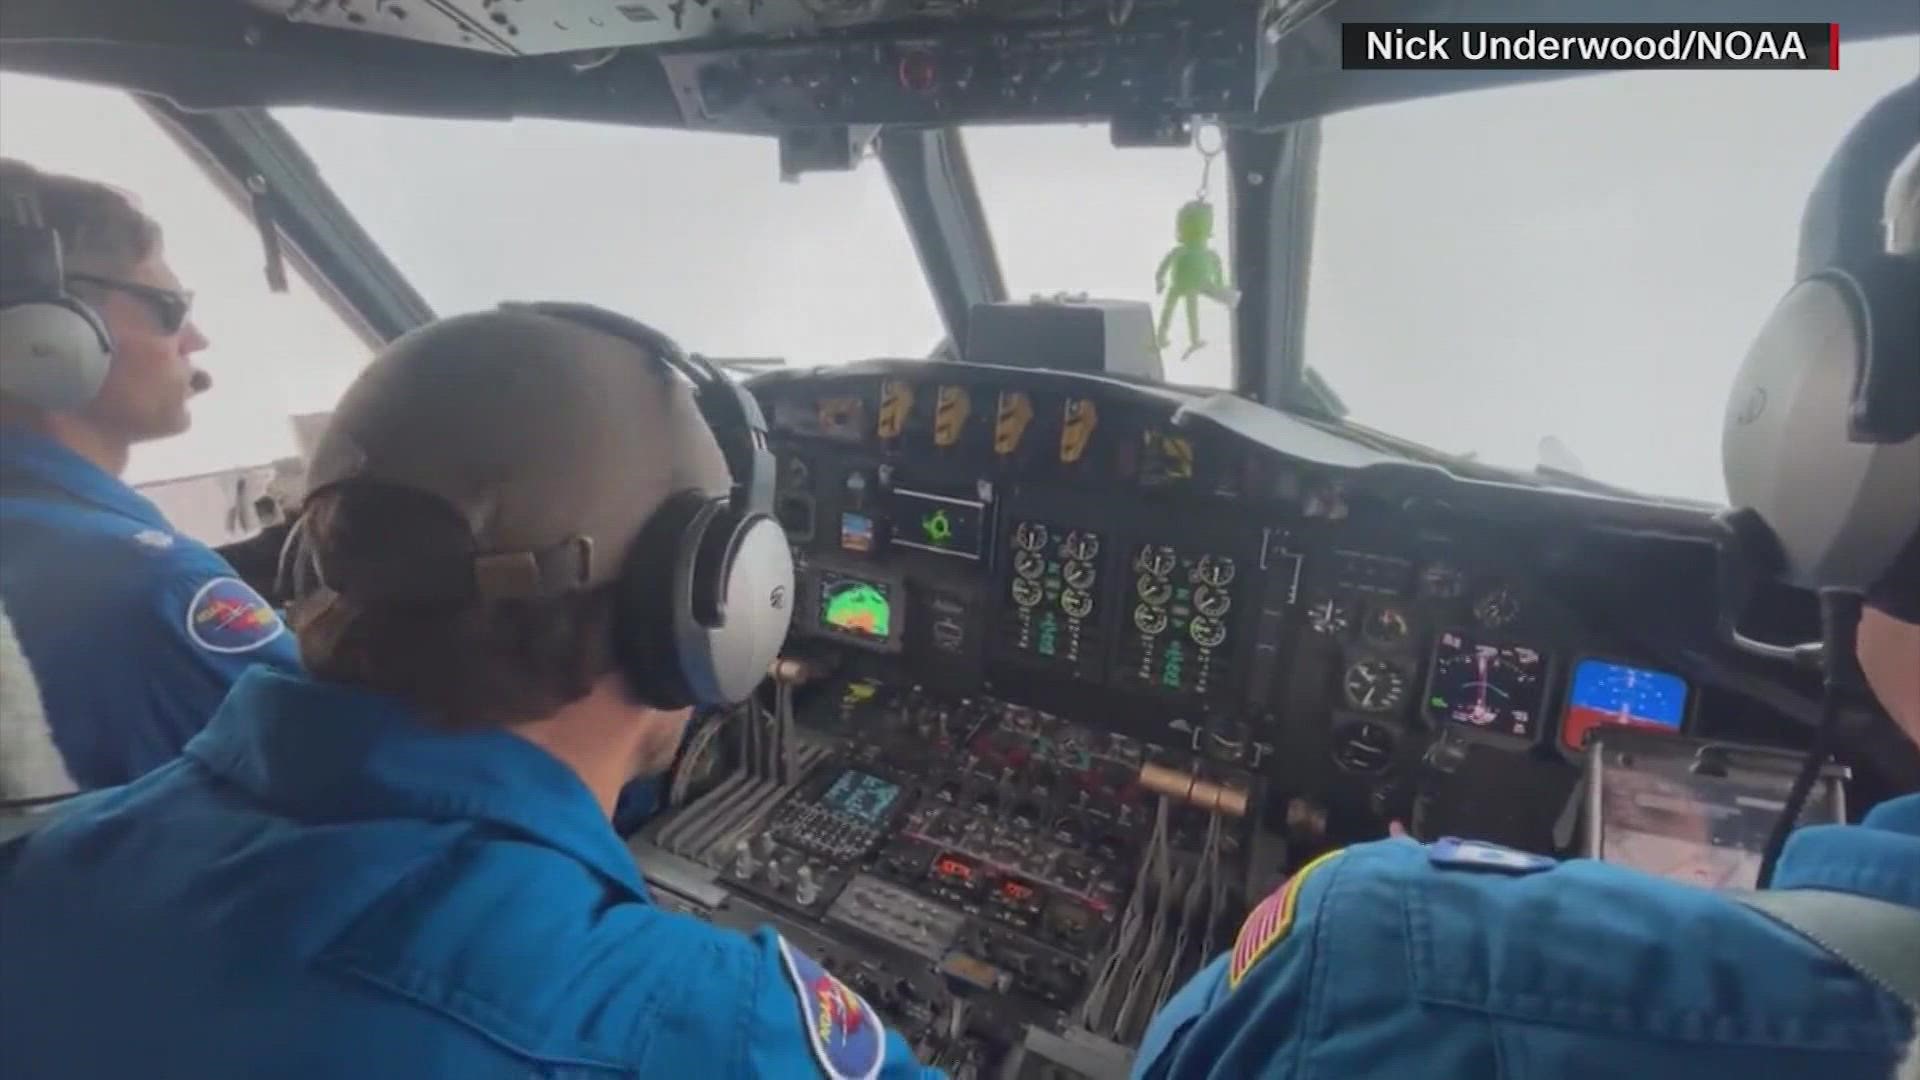 The brave crews fly into one of the most destructive forces of nature to measure hurricanes and help forecasters determine the intensity and likely landfall.